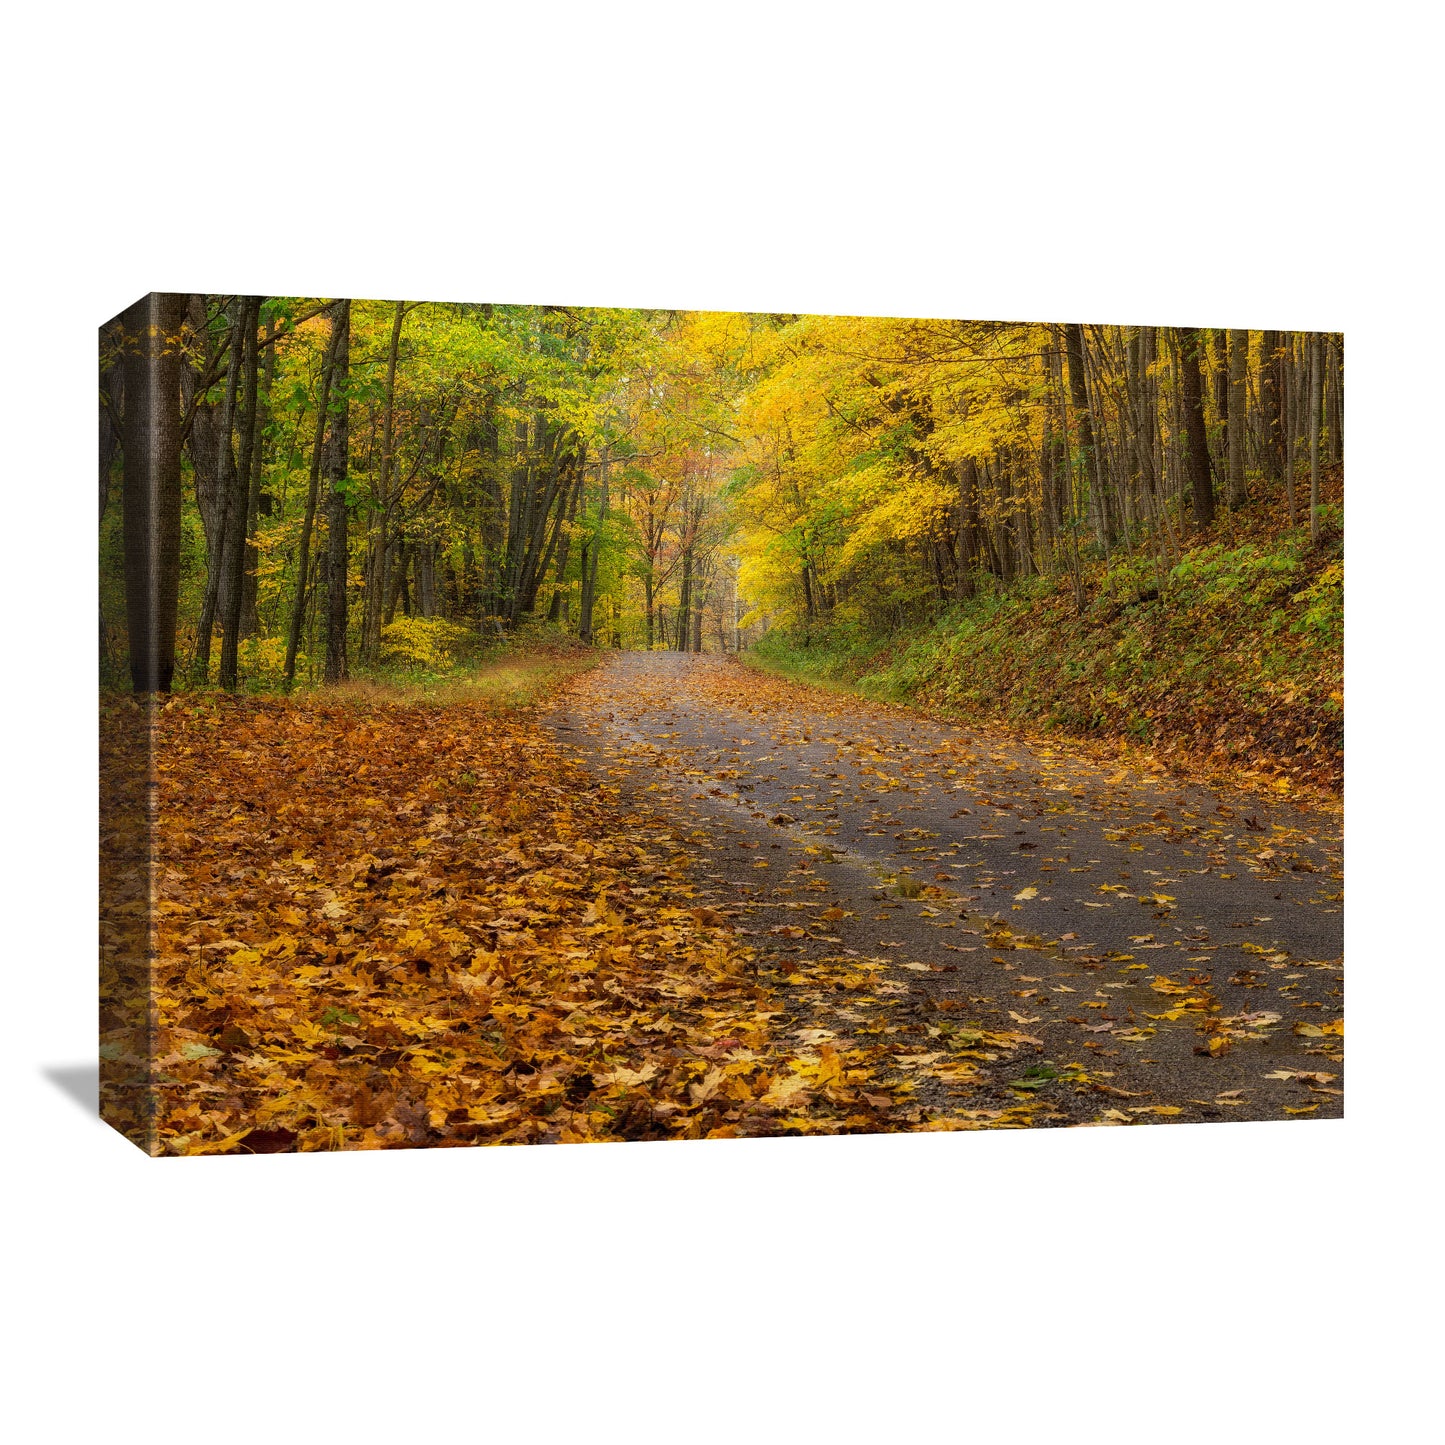 autumn road in the hocking hills forest of ohio on a canvas print